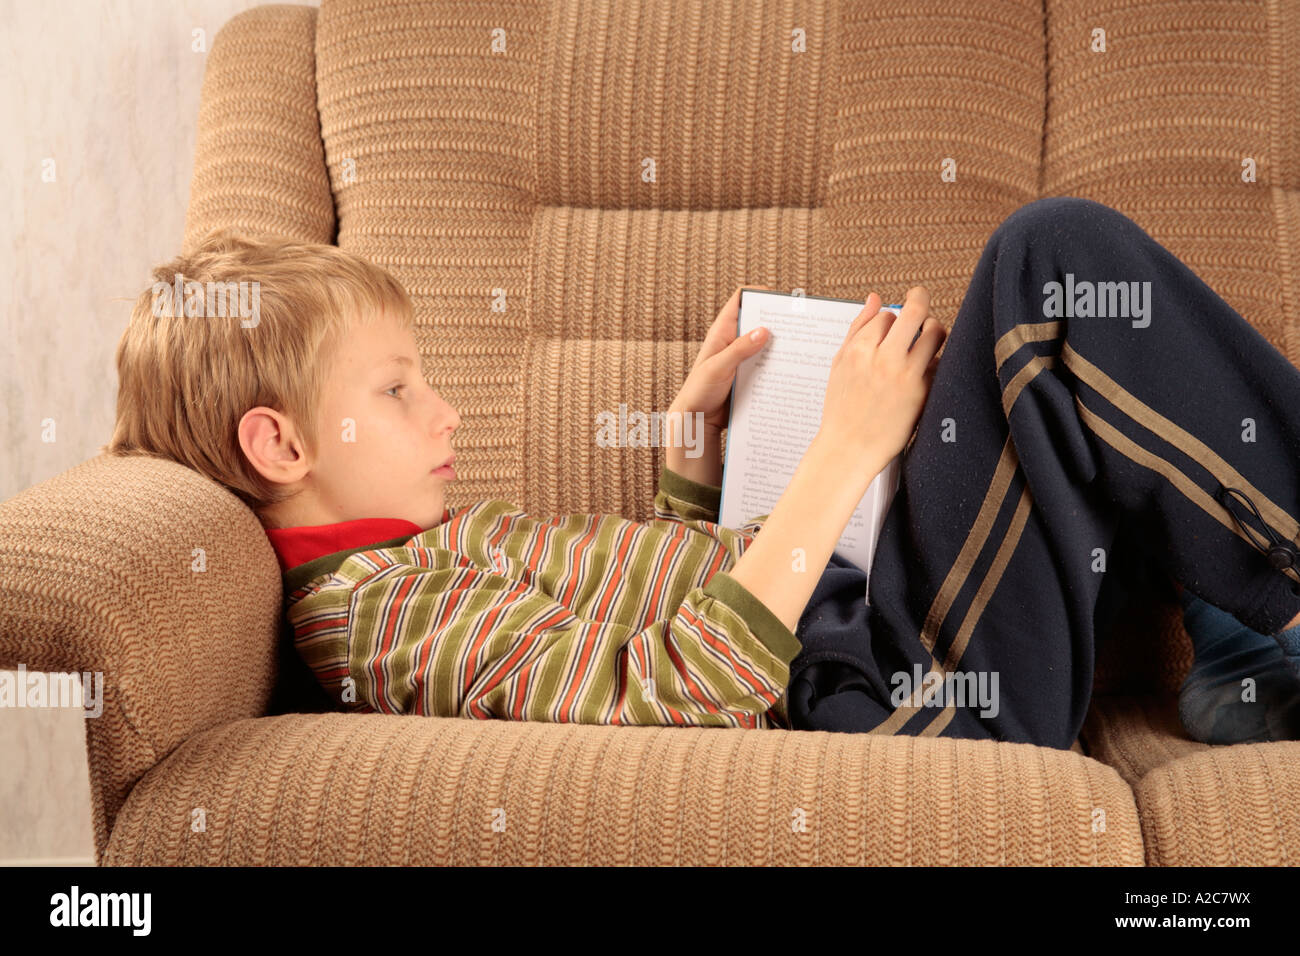 portrait of a young fair boy lying on a sofa and reading a book Stock Photo